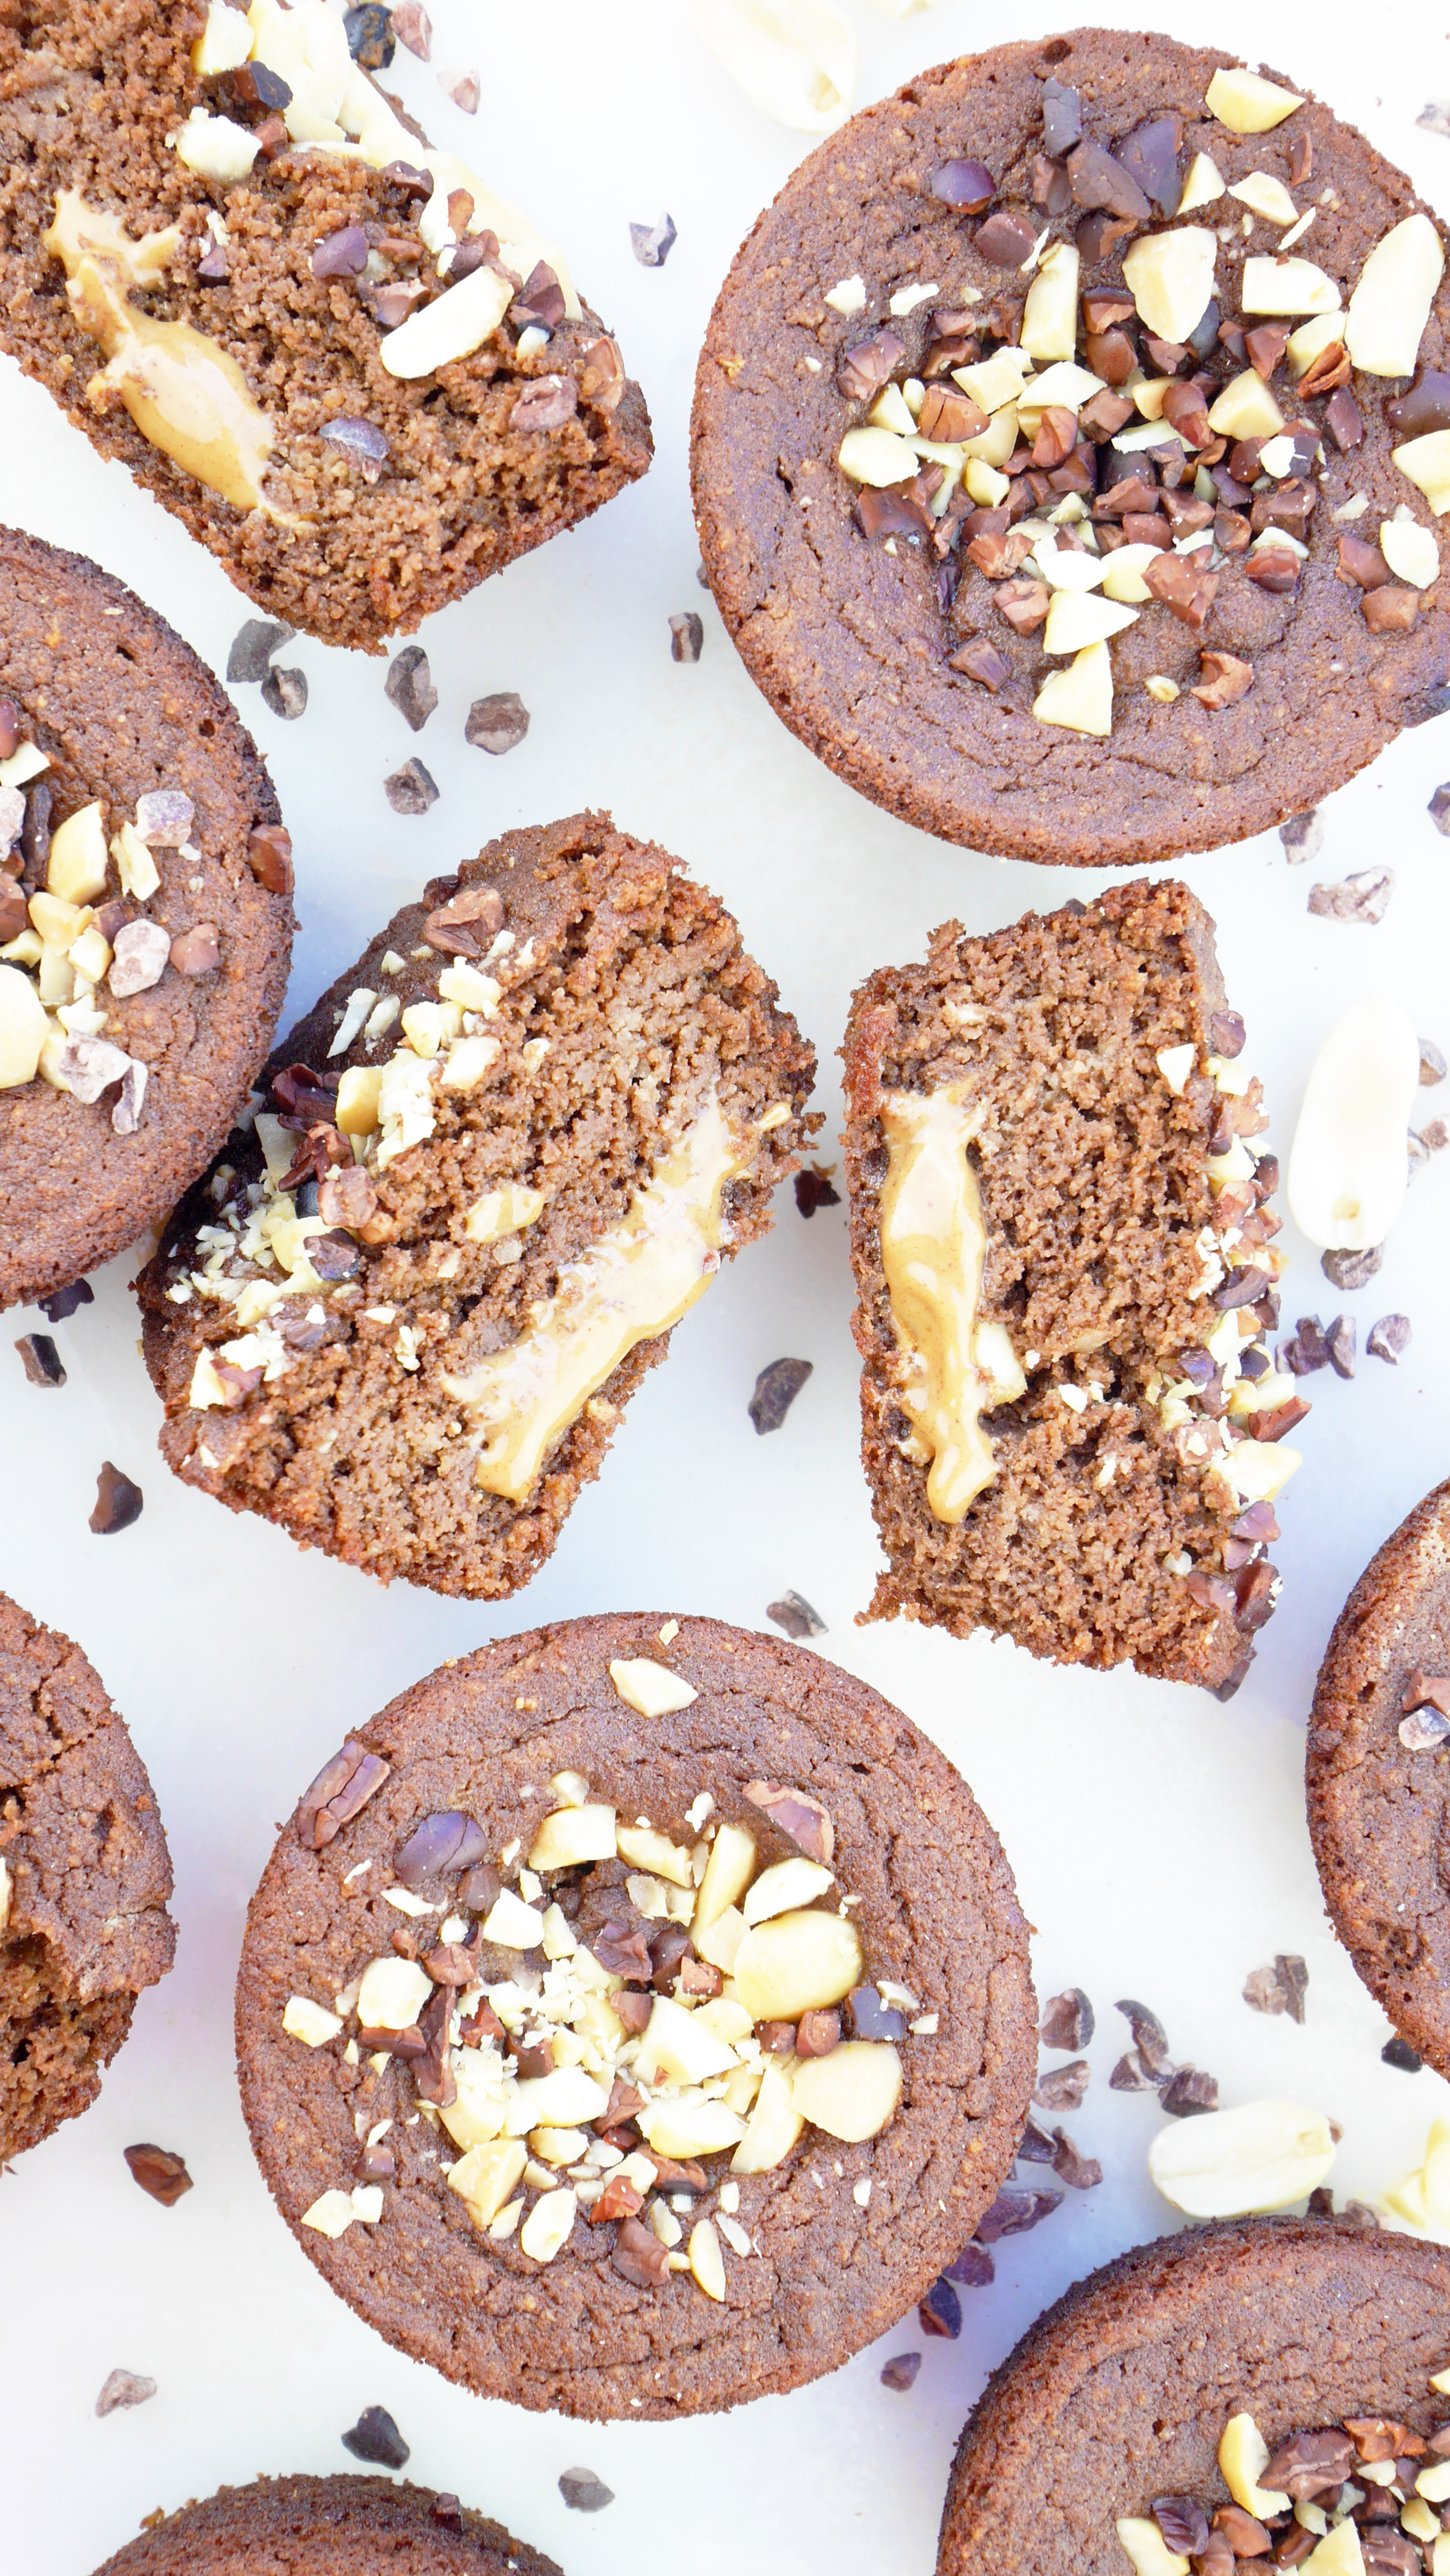 PB-stuffed chocolate muffins that sneaks in your veggies? Sign me up, yall! Peanut Butter-Stuffed Chocolate Veggie Muffins Sneakz Organic Milkshakes